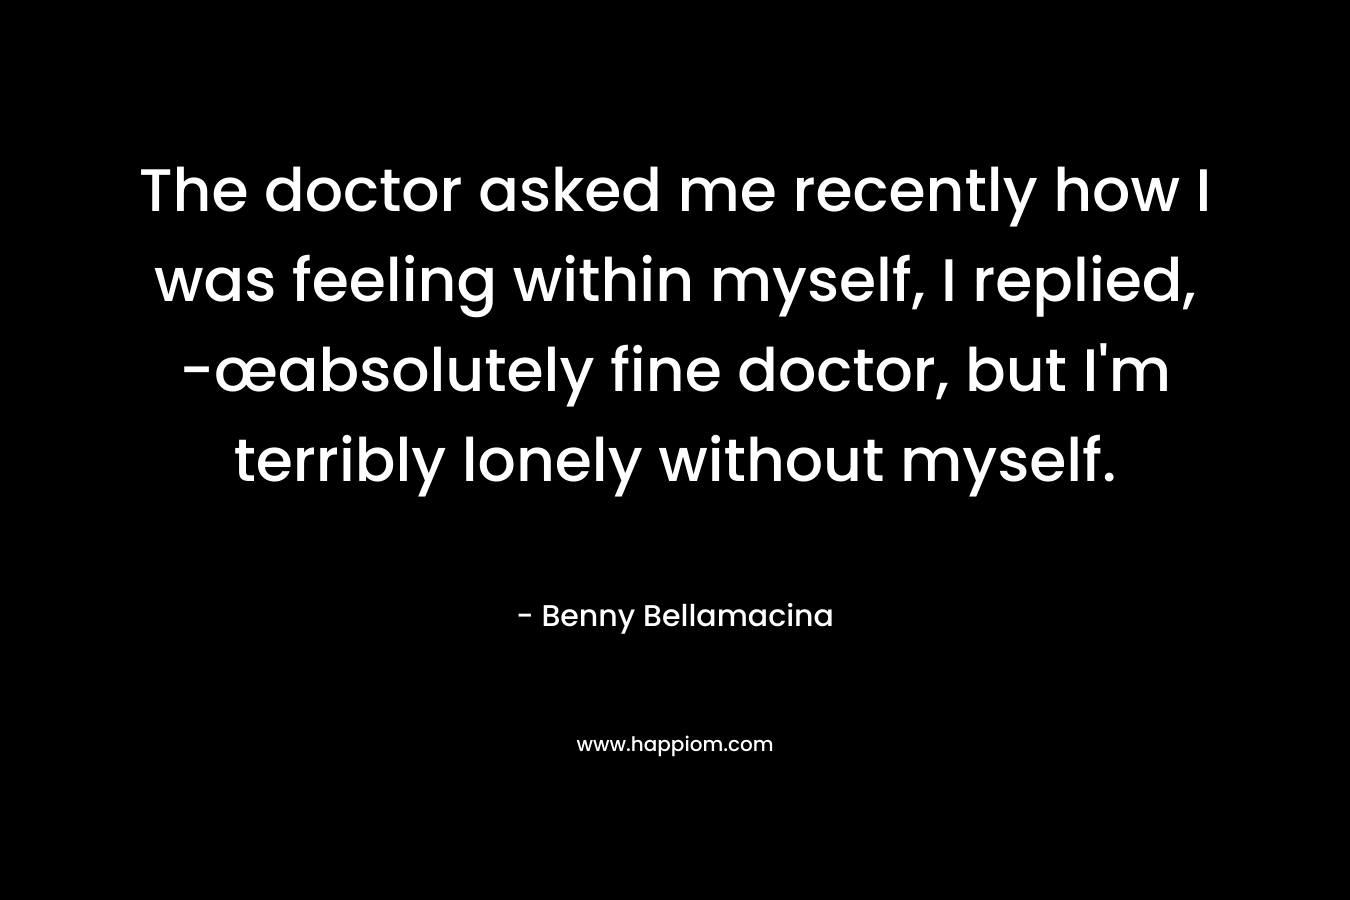 The doctor asked me recently how I was feeling within myself, I replied, -œabsolutely fine doctor, but I'm terribly lonely without myself.